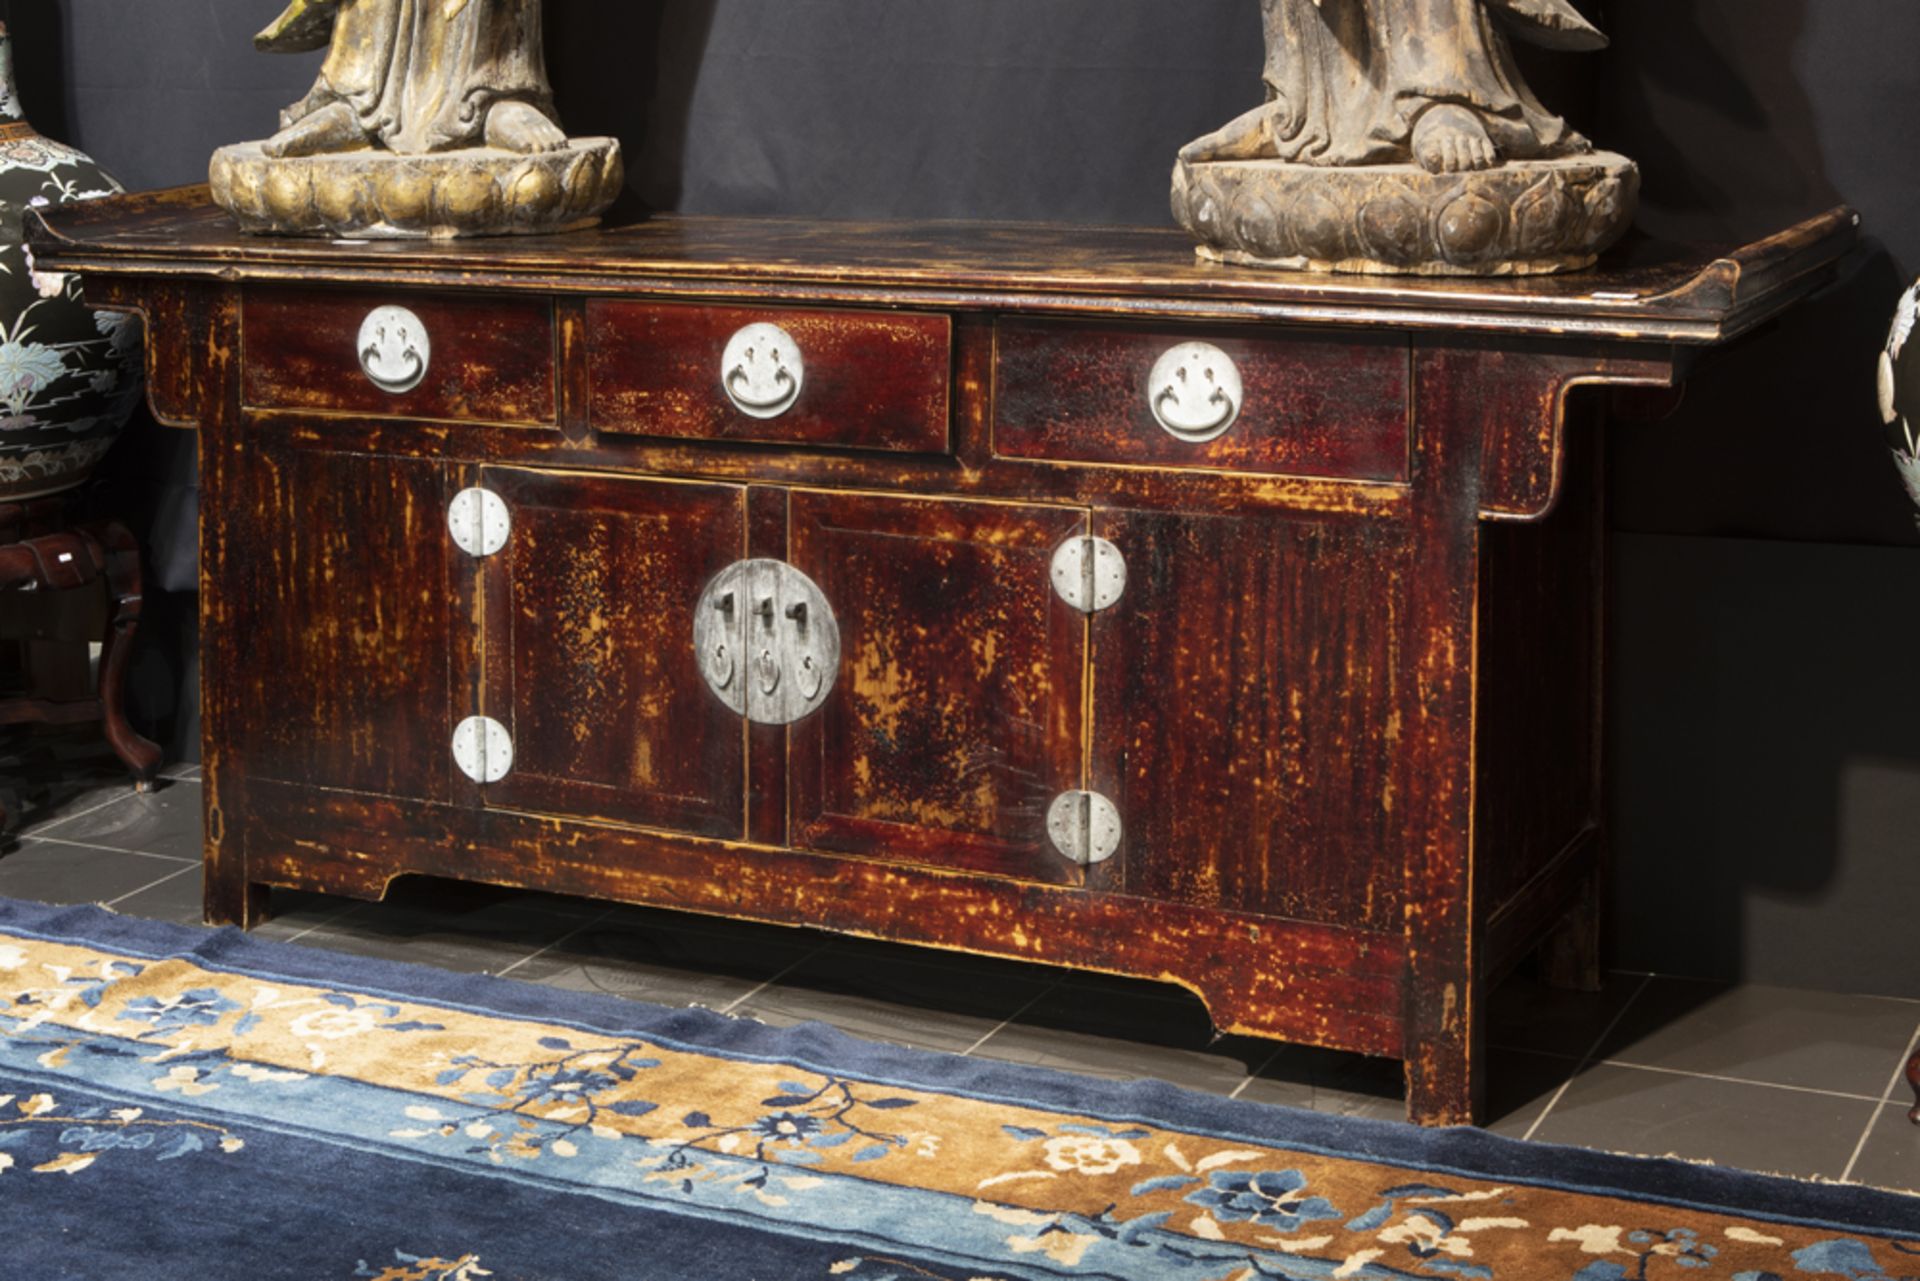 antique Chinese Qing period sideboard in lacquered wood with a nice reddish patina || Antiek Chinees